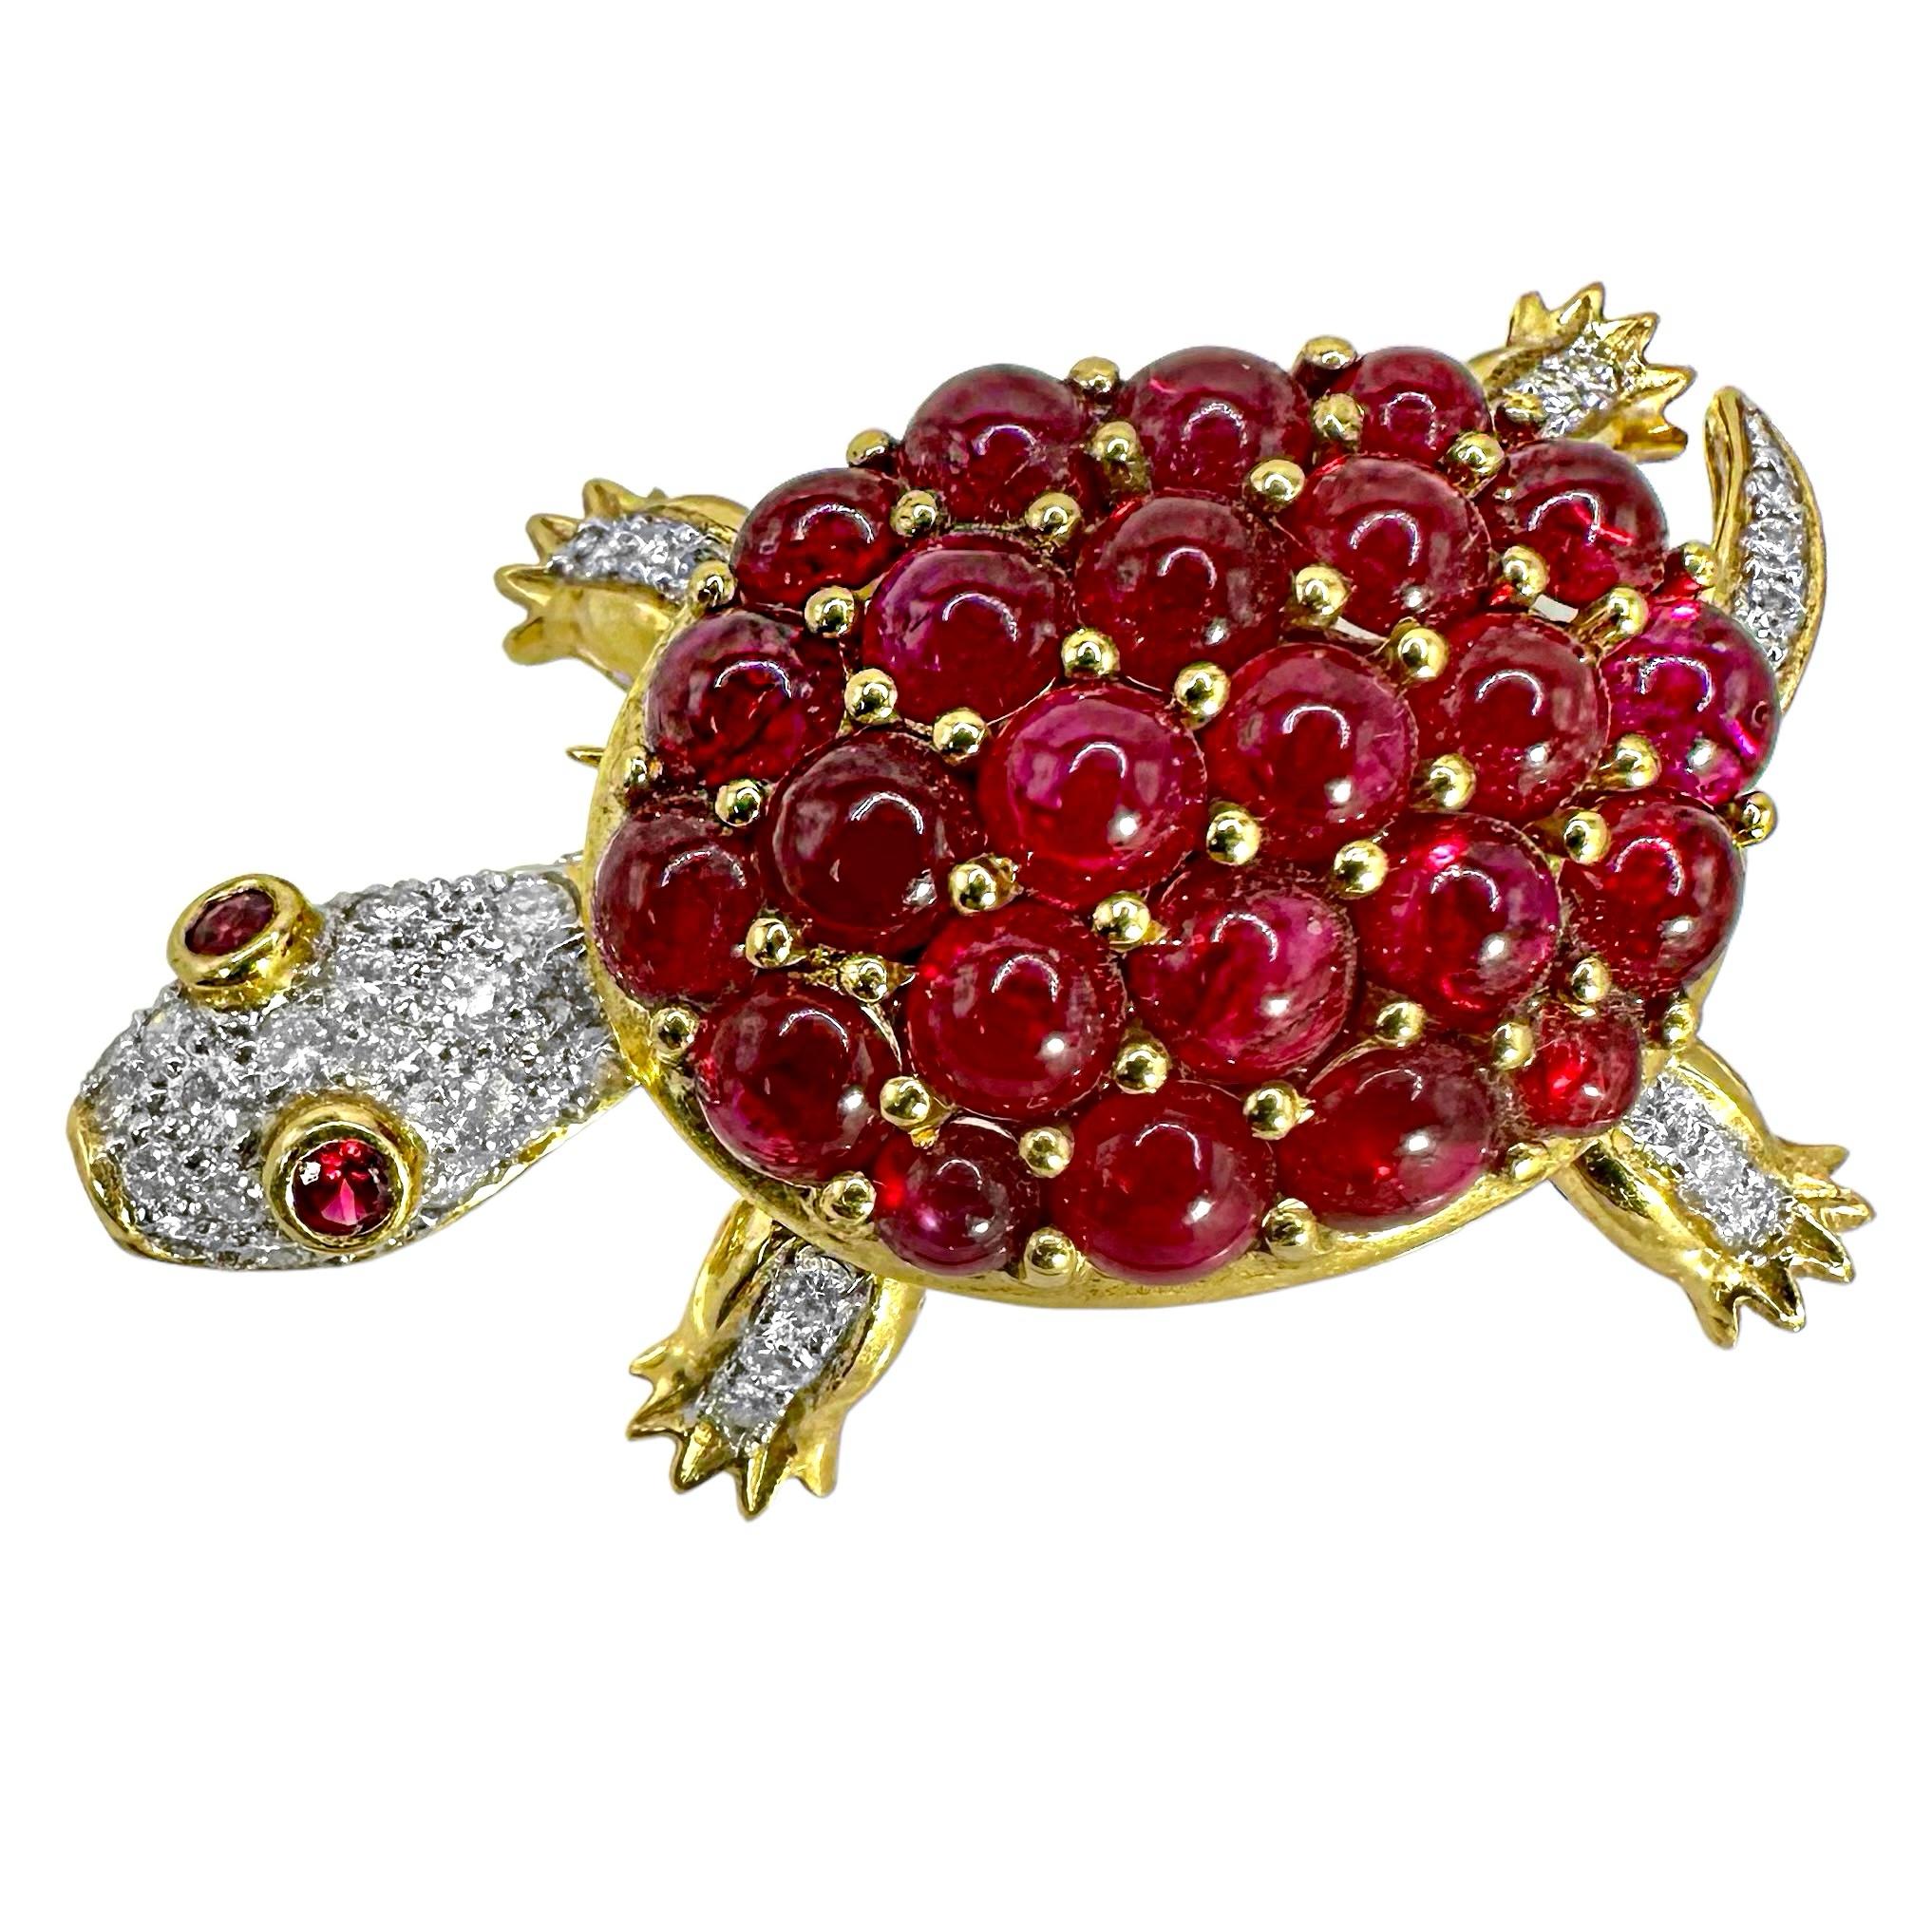 Adorable Turtle Brooch/Pendant with Motion in 18K Gold, Diamonds, and Rubies For Sale 3